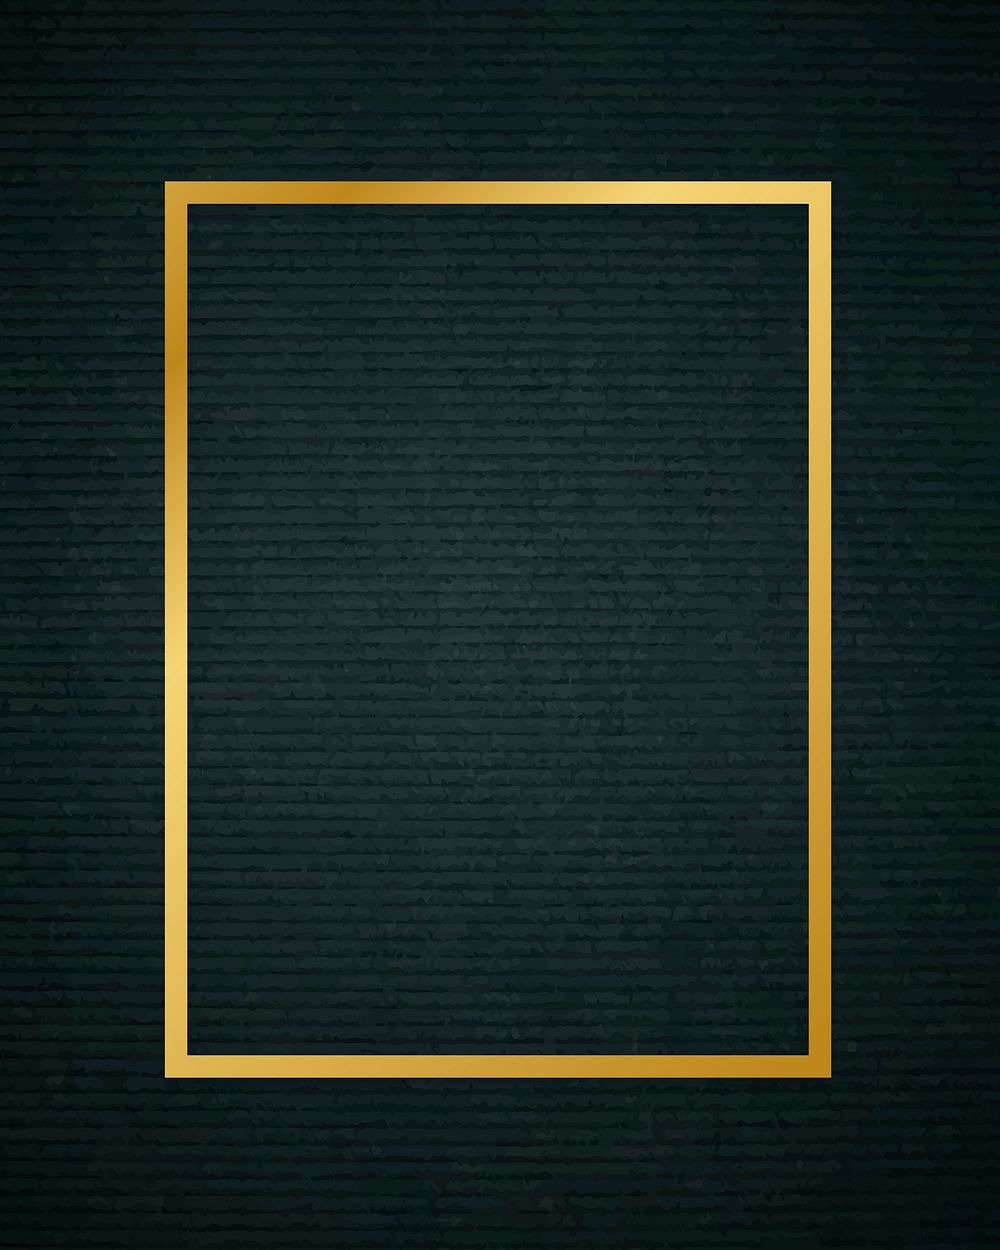 Gold rectangle frame on a dark fabric textured background